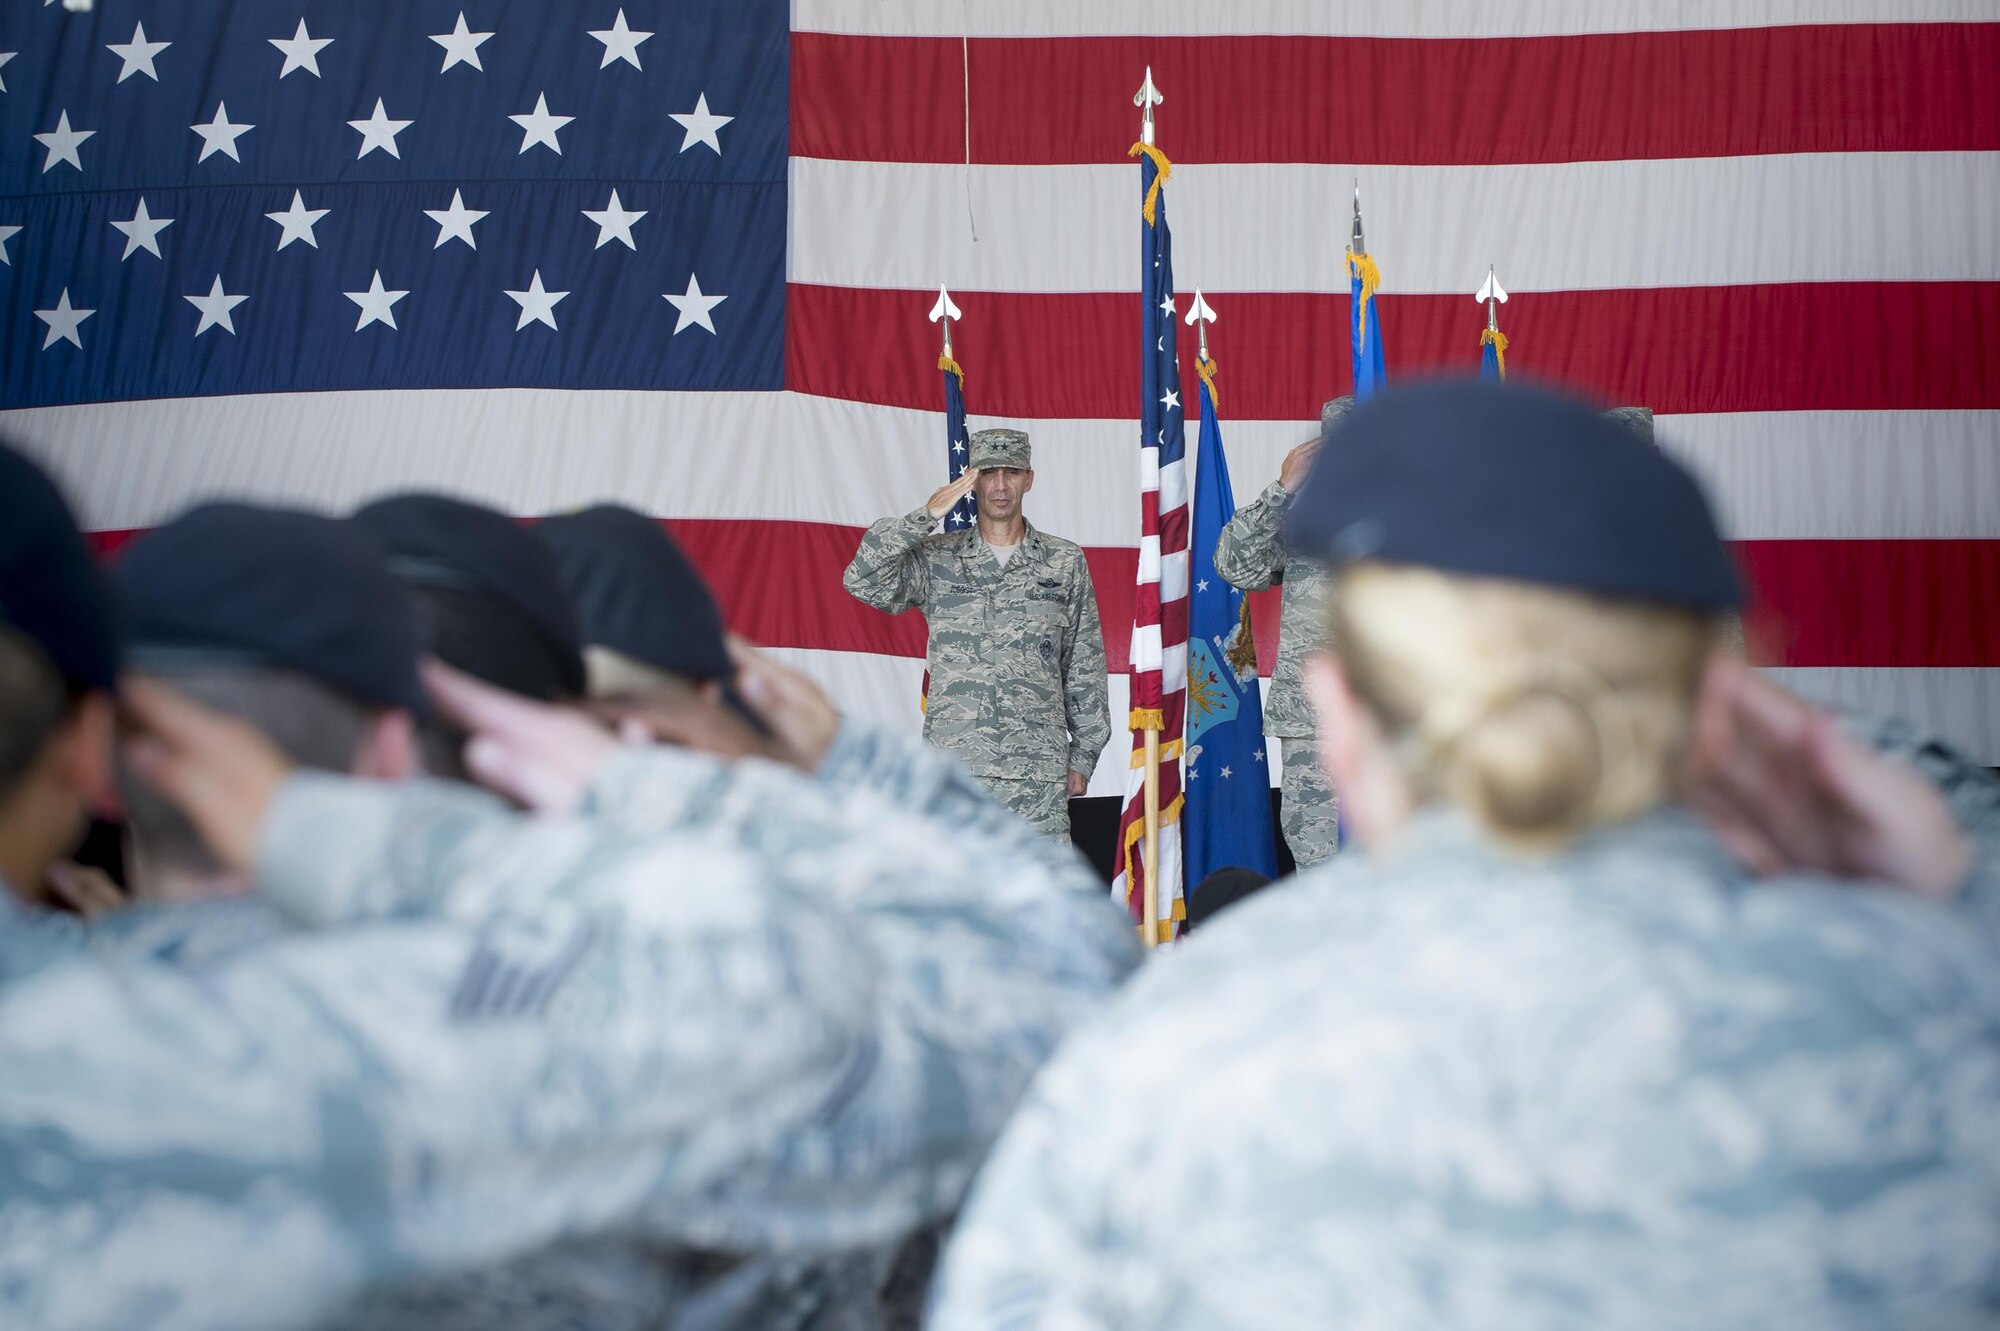 U.S. Air Force Maj. Gen. Scott Zobrist, Ninth Air Force commander, renders a salute during a change of command ceremony, June 28, 2016, at Moody Air Force Base, Ga. Zobrist presided over the ceremony and welcomed the 93d Air Ground Operations Wing’s newest commander, Col. Jeffery Valenzia. (U.S. Air Force photo by Senior Airman Ceaira Young/Released)